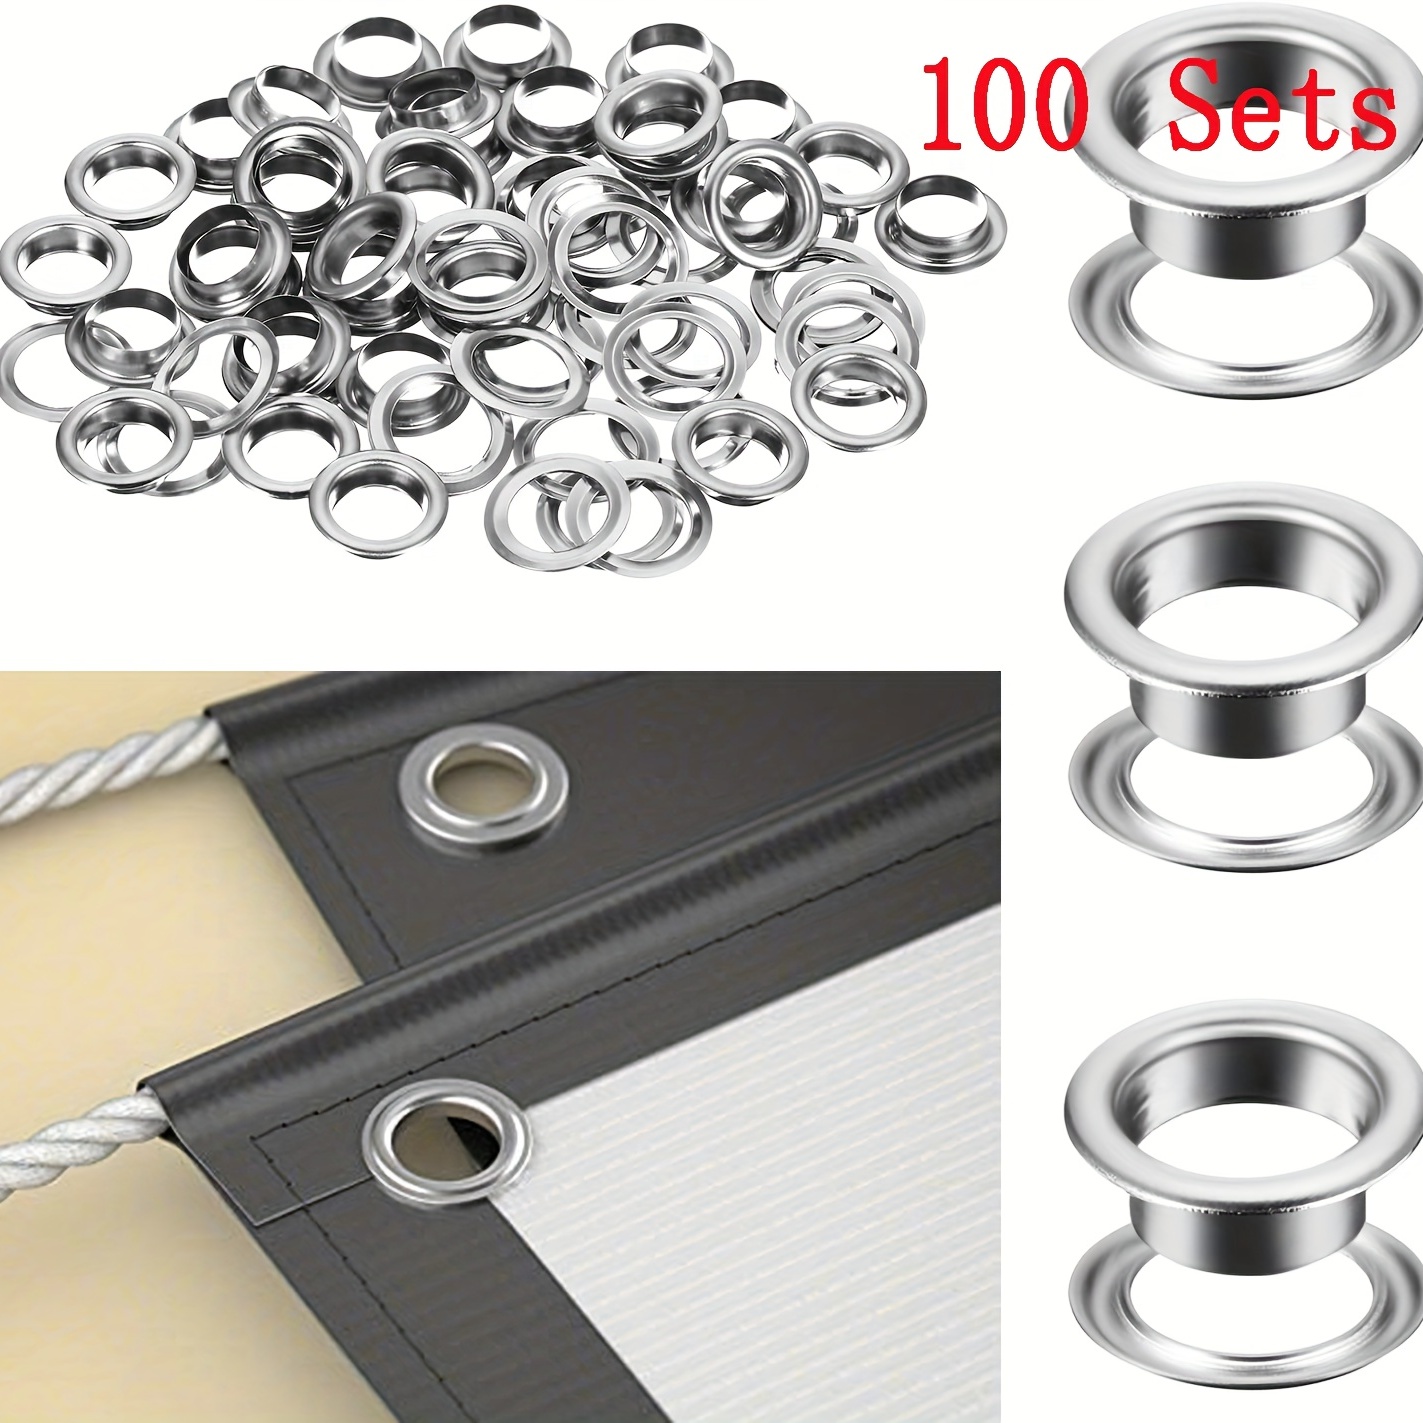 

100 Sets 3/8" (10mm) Grommet Tool, Silver Color Grommet Eyelet With Washer Fit Leather Craft Shoes Belt Cap